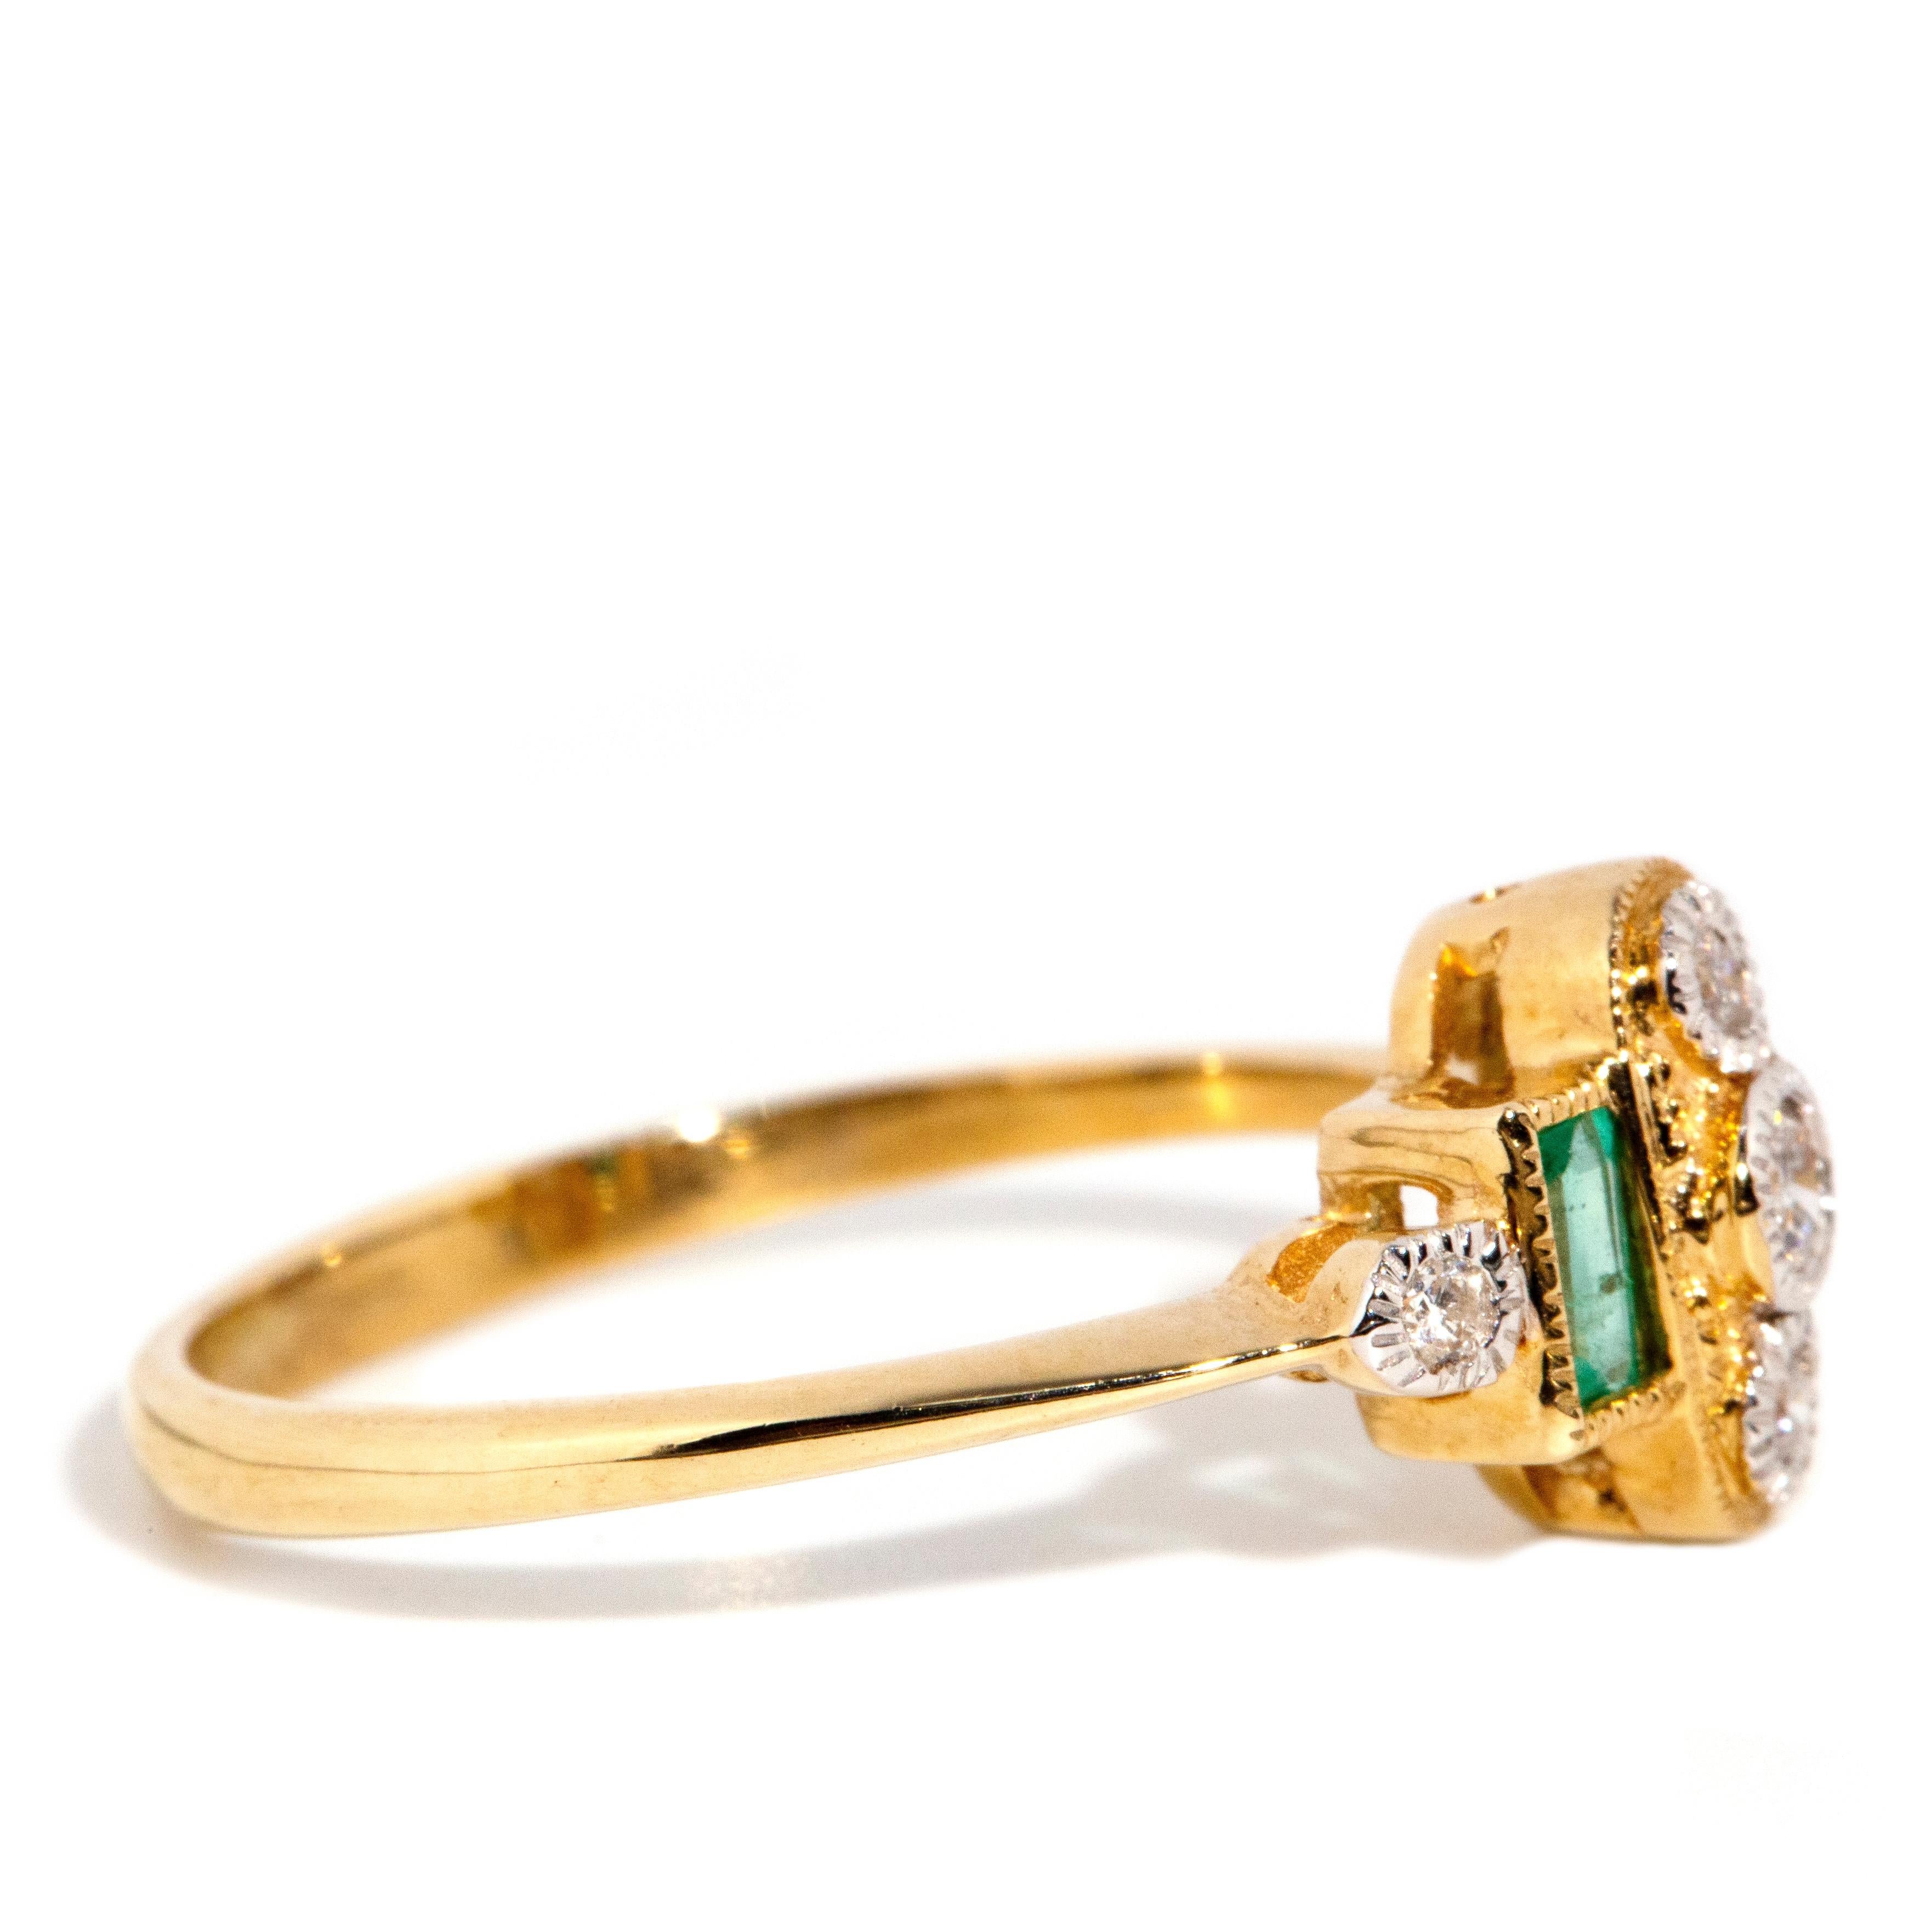 Vintage Inspired Diamond & Bright Green Emerald Cluster Ring 9 Carat Yellow Gold In New Condition For Sale In Hamilton, AU